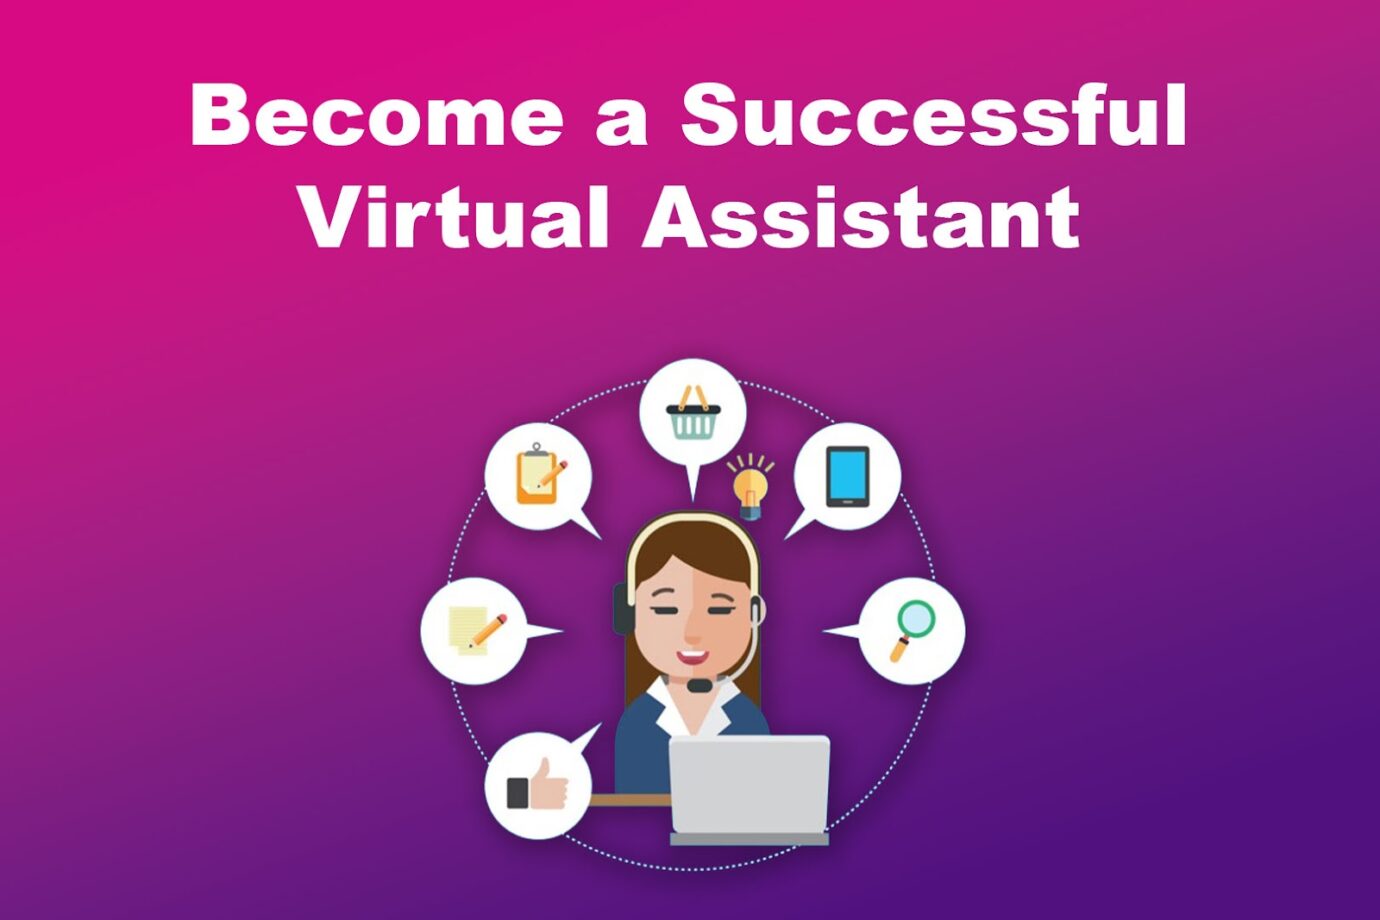 How to Become a Successful Virtual Assistant